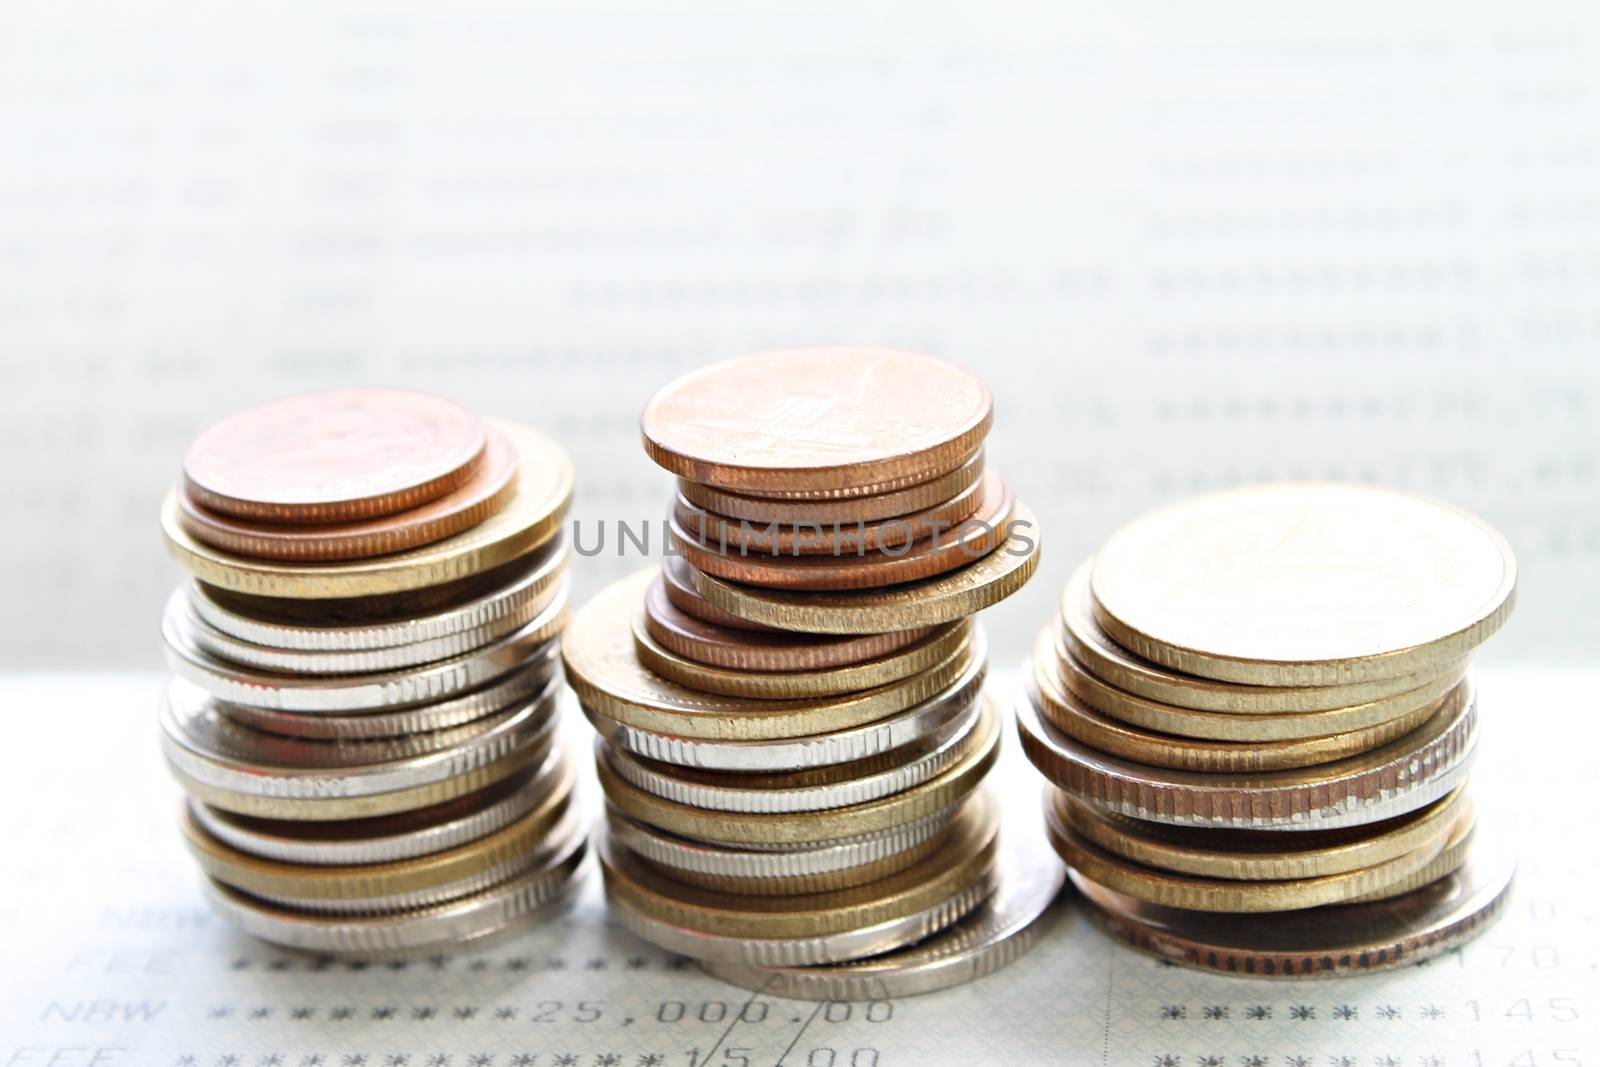 Business, finance, saving money, banking, loan, investment, taxes or accounting concept : Coins stack on saving account book or financial statement